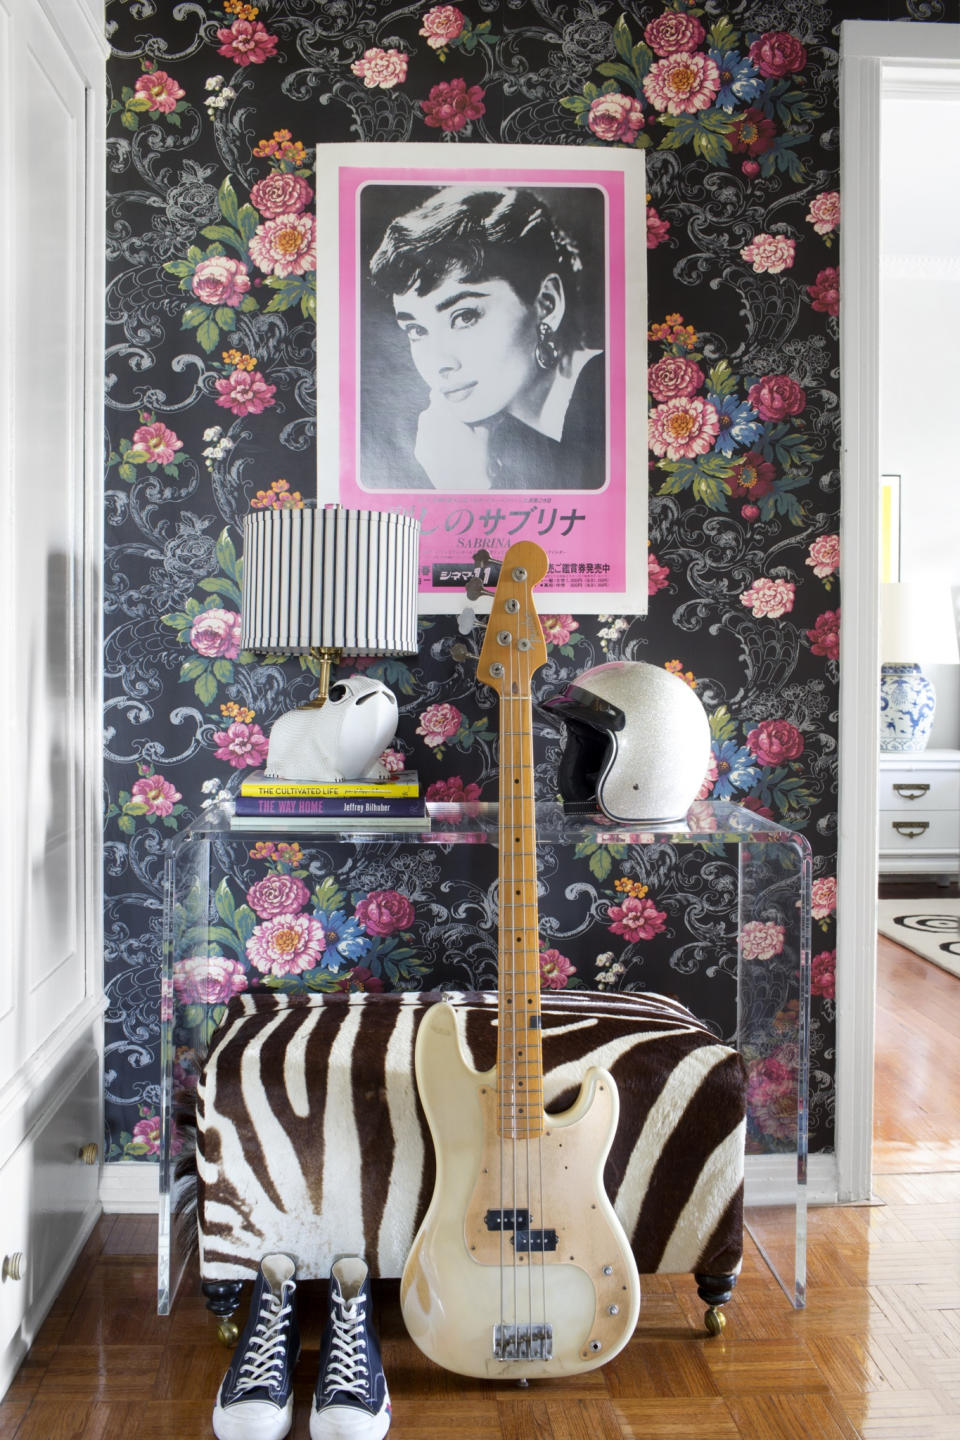 In this photo provided by courtesy of Burnham Design, traditional floral wallpaper is contrasted with modern furniture and unexpected accessories like a bike helmet and a vintage Japanese poster for the movie "Sabrina," to create a fresh and edgy look designed by Betsy Burnham and Max Humphrey of Burnham Design, in this residence in Los Angeles. (AP Photo/Courtesy Burnham Design, Sarah Dorio)